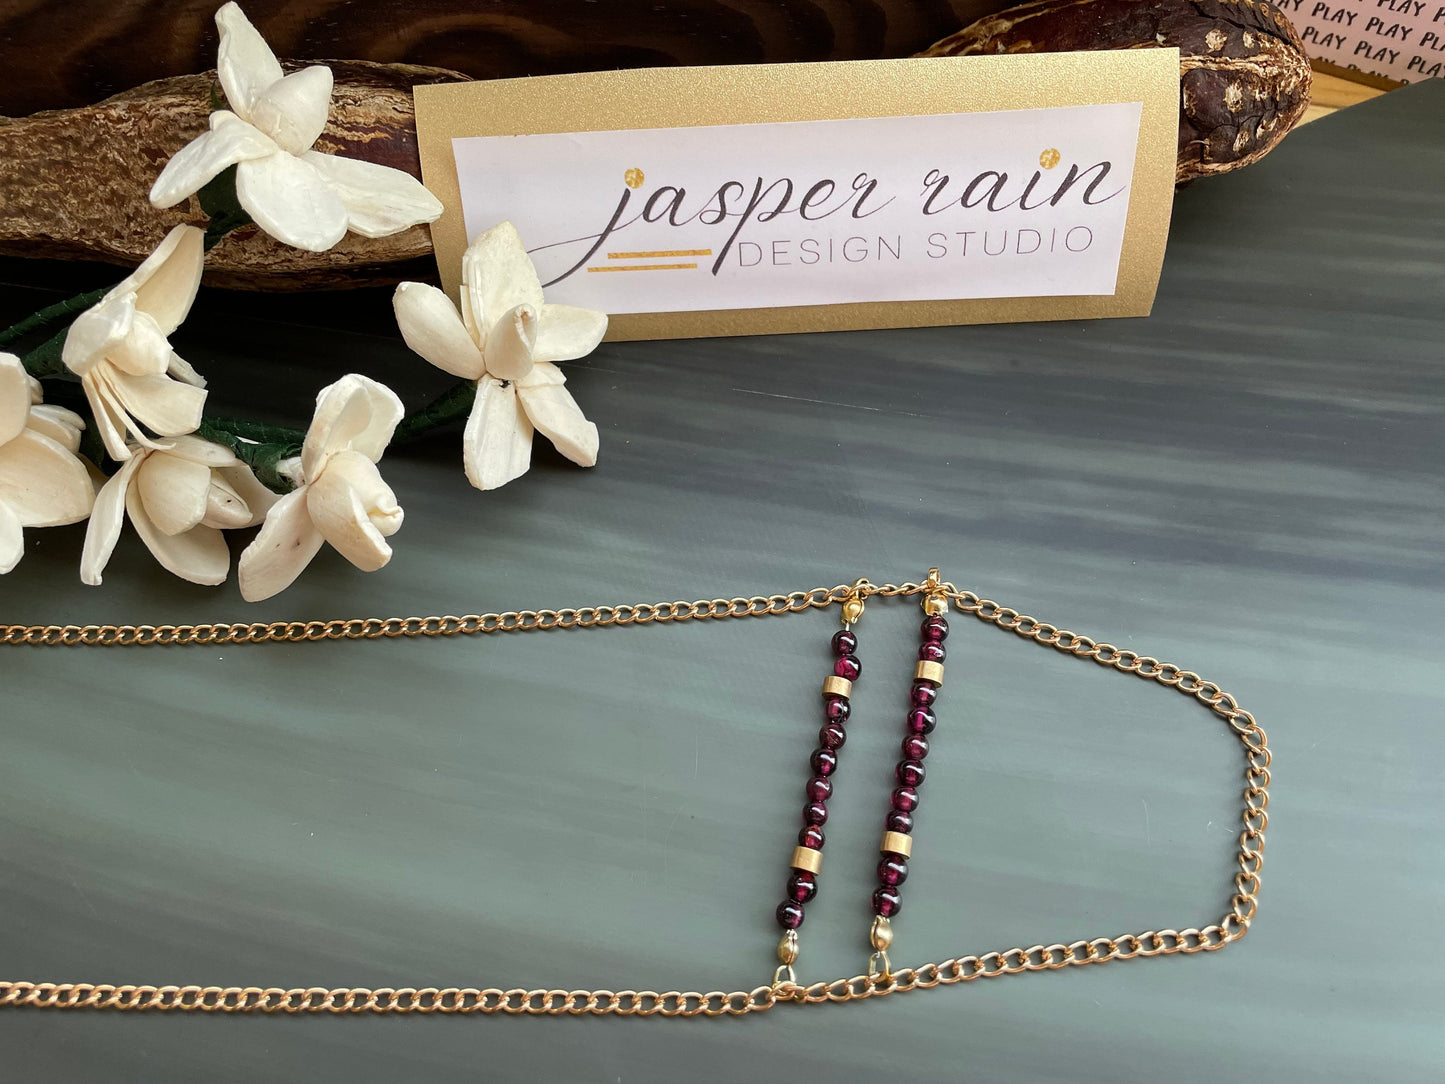 Long Garnet and gold-filled chain necklace, perfect alone or layered: handmade necklace